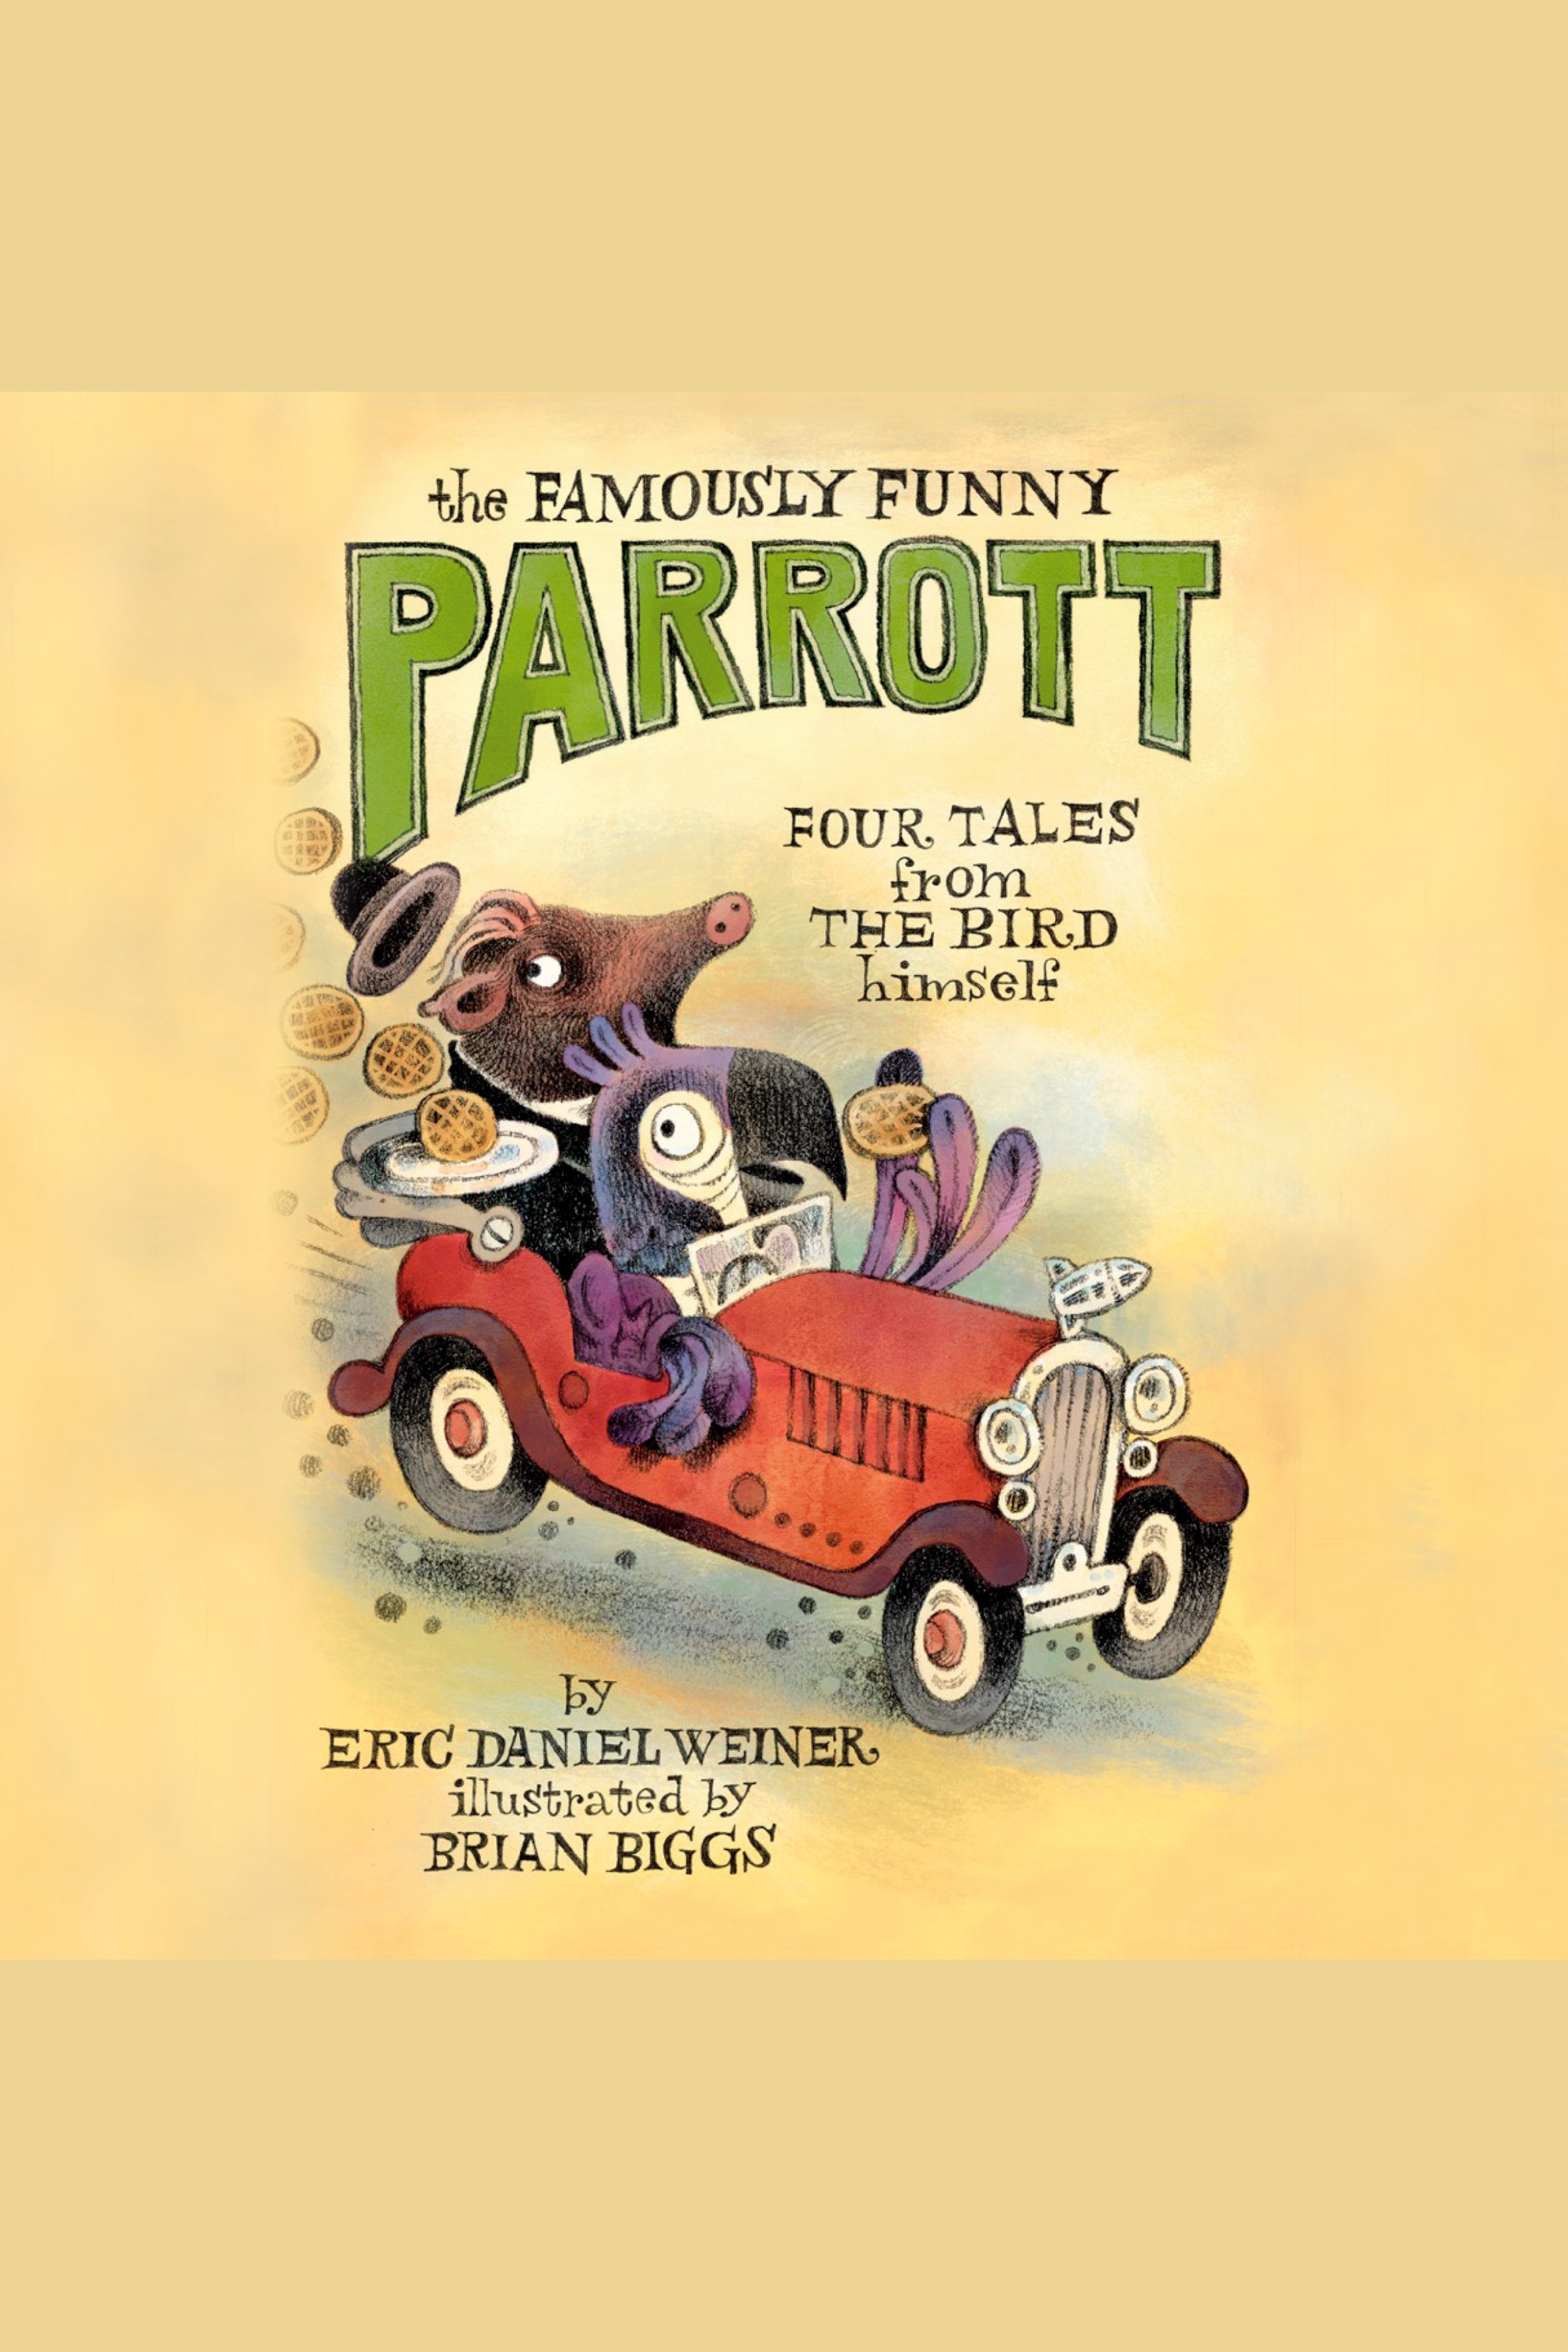 The Famously Funny Parrott Four Tales from the Bird Himself cover image